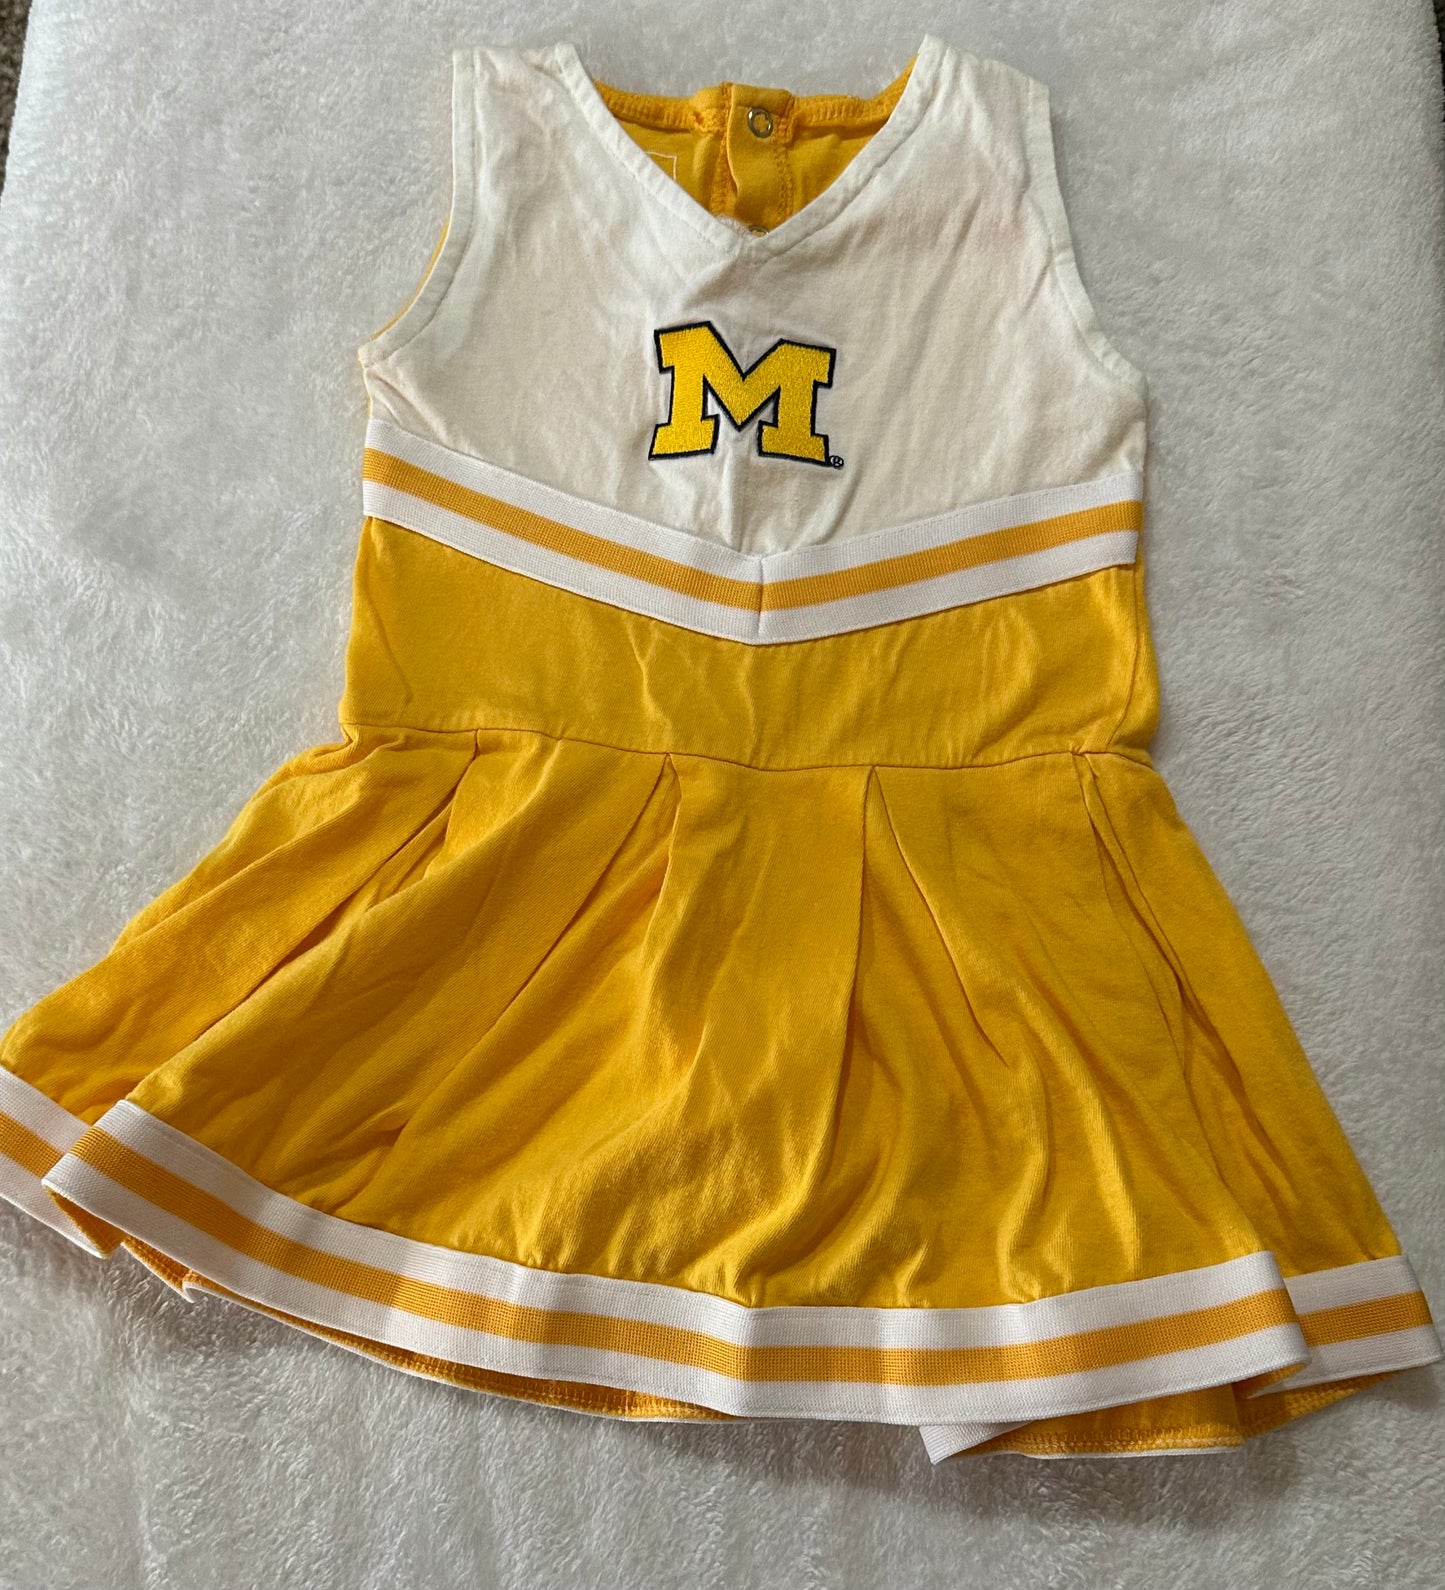 University of Michigan 18 months cheerleader outfit